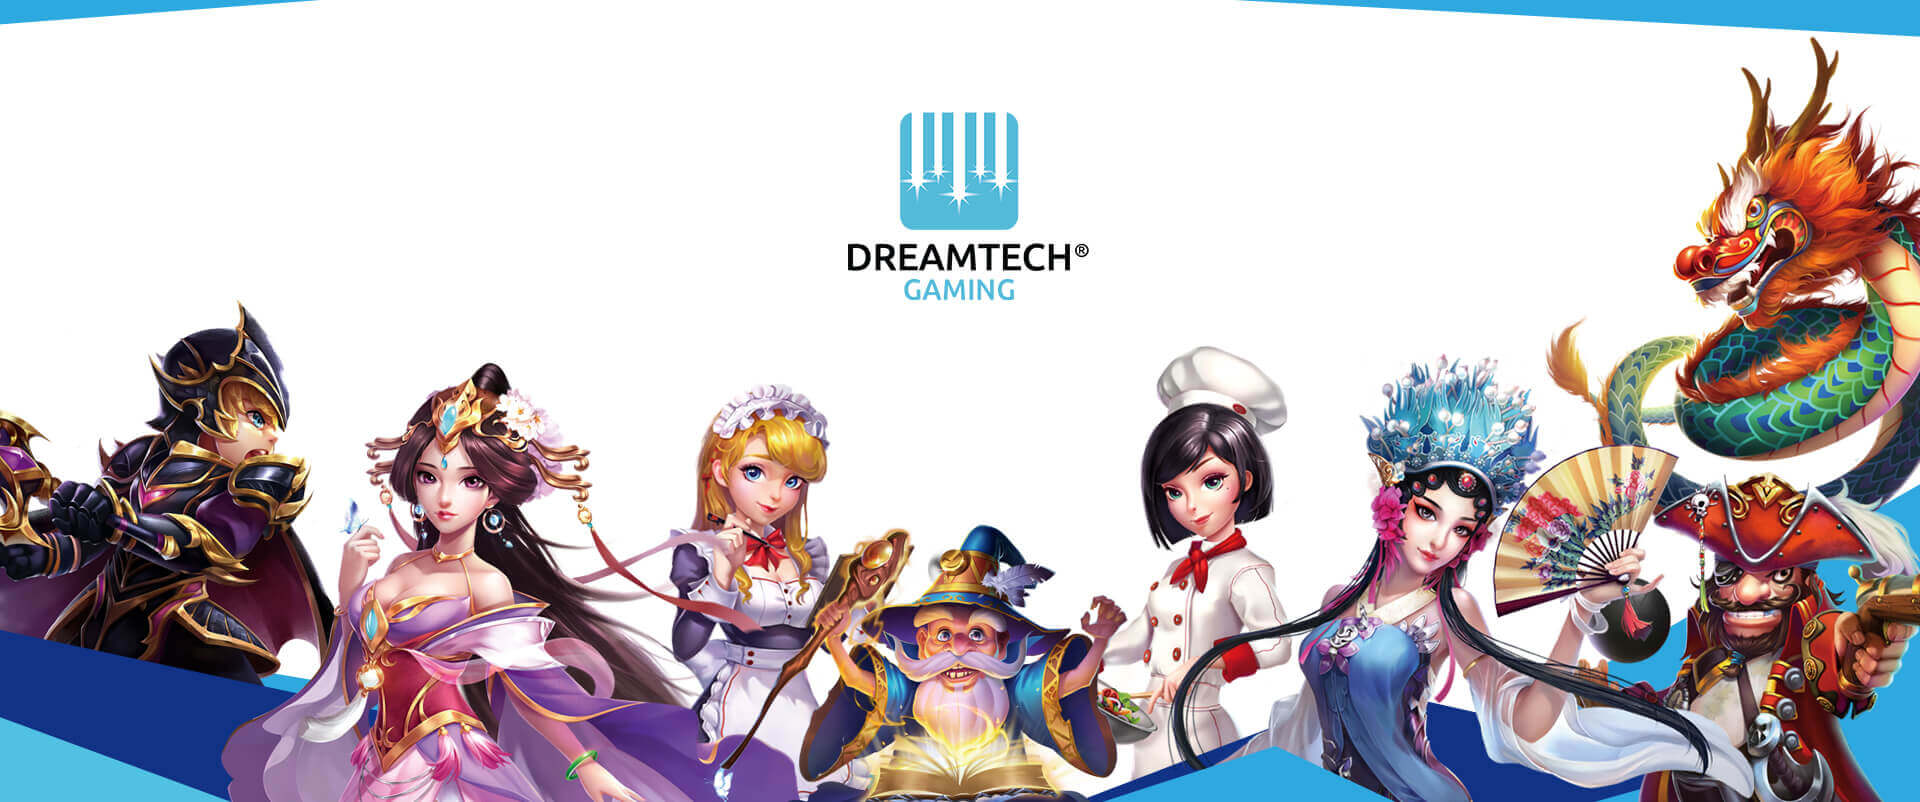 DreamTech Gaming - Games overview header